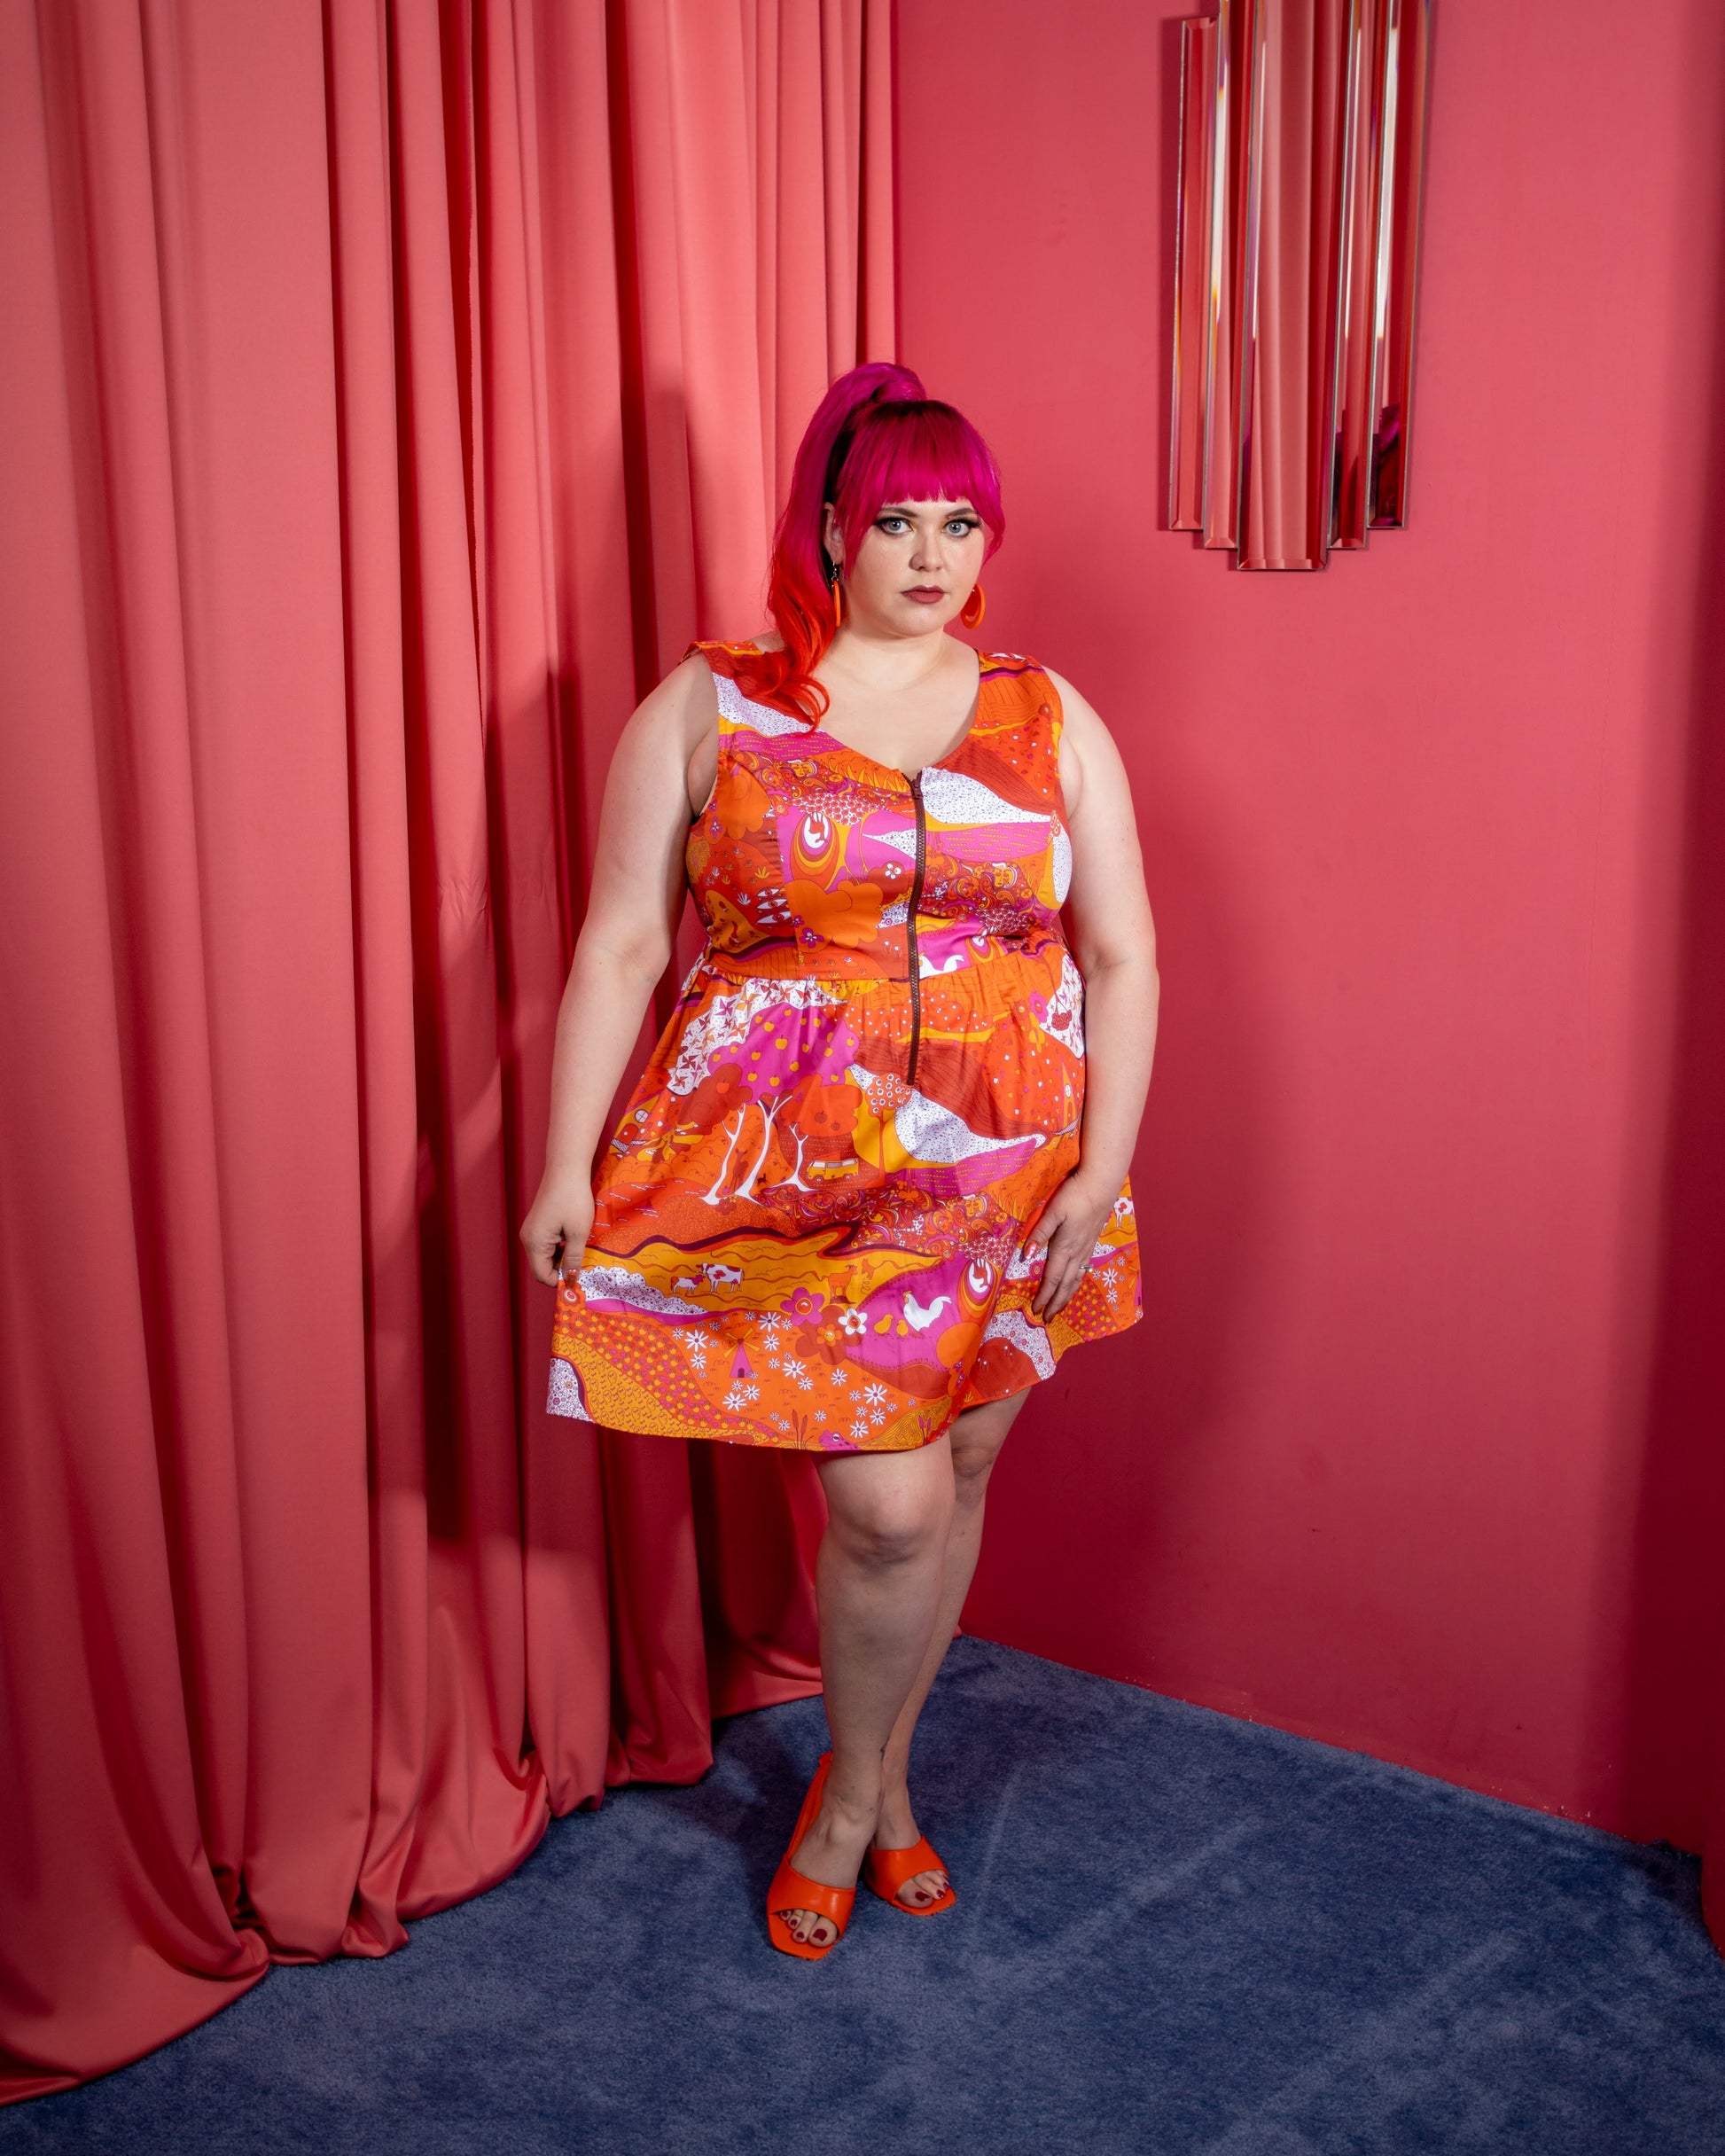 Pretty pink-haired model in bright red orange and pink dress with front zip in pink room